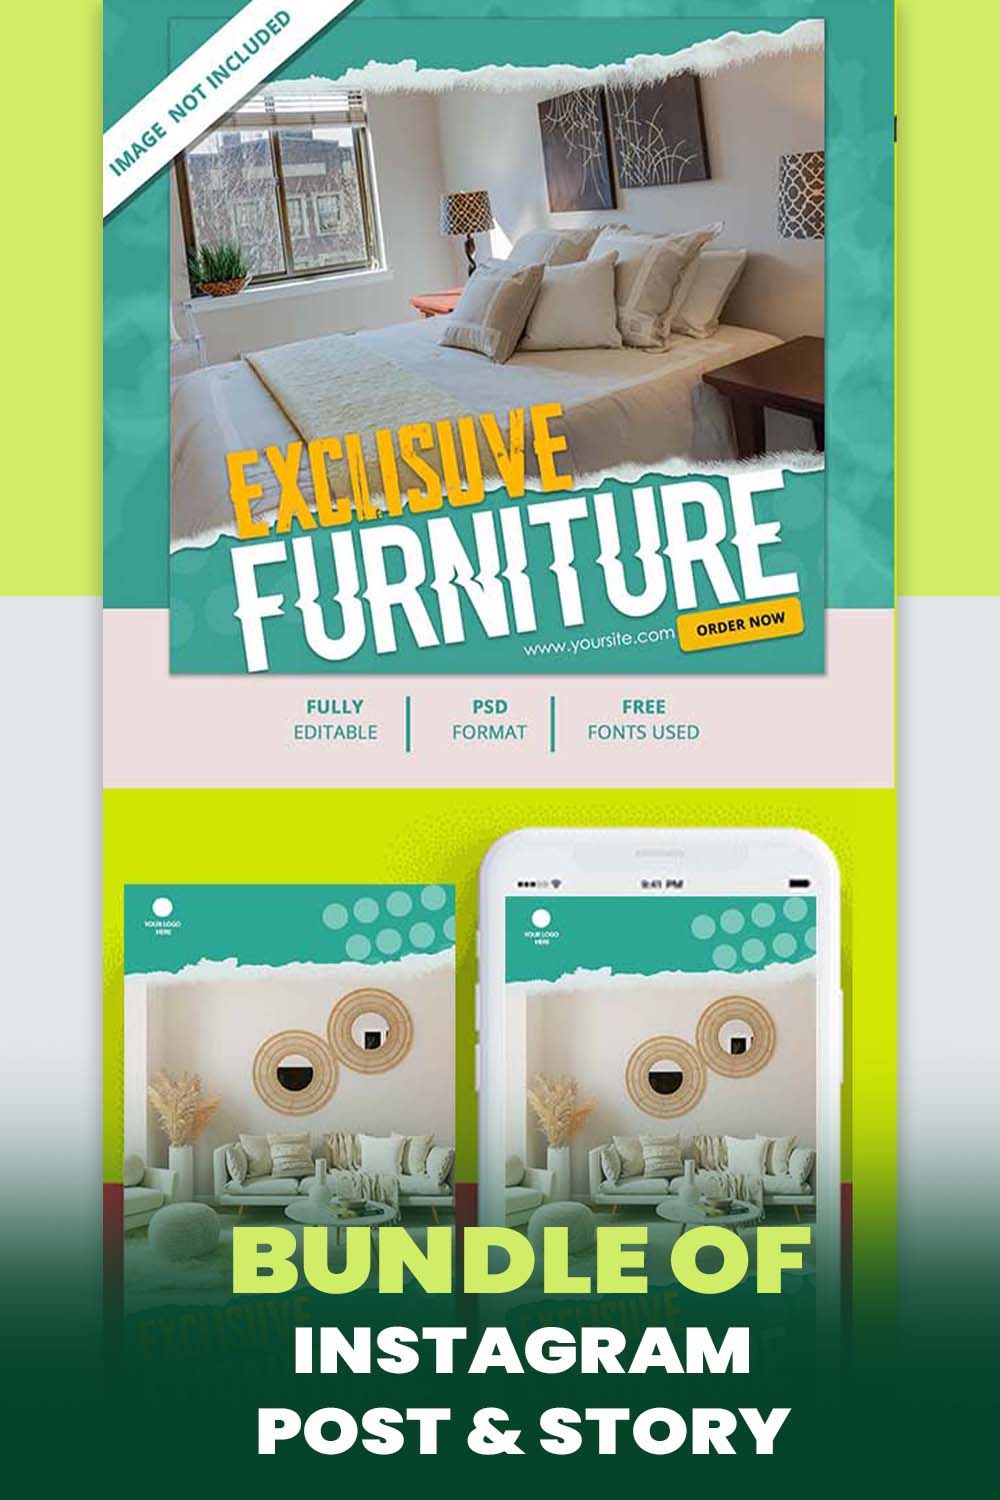 Exclusive Furniture Instagram Post and Story Templates pinterest image.